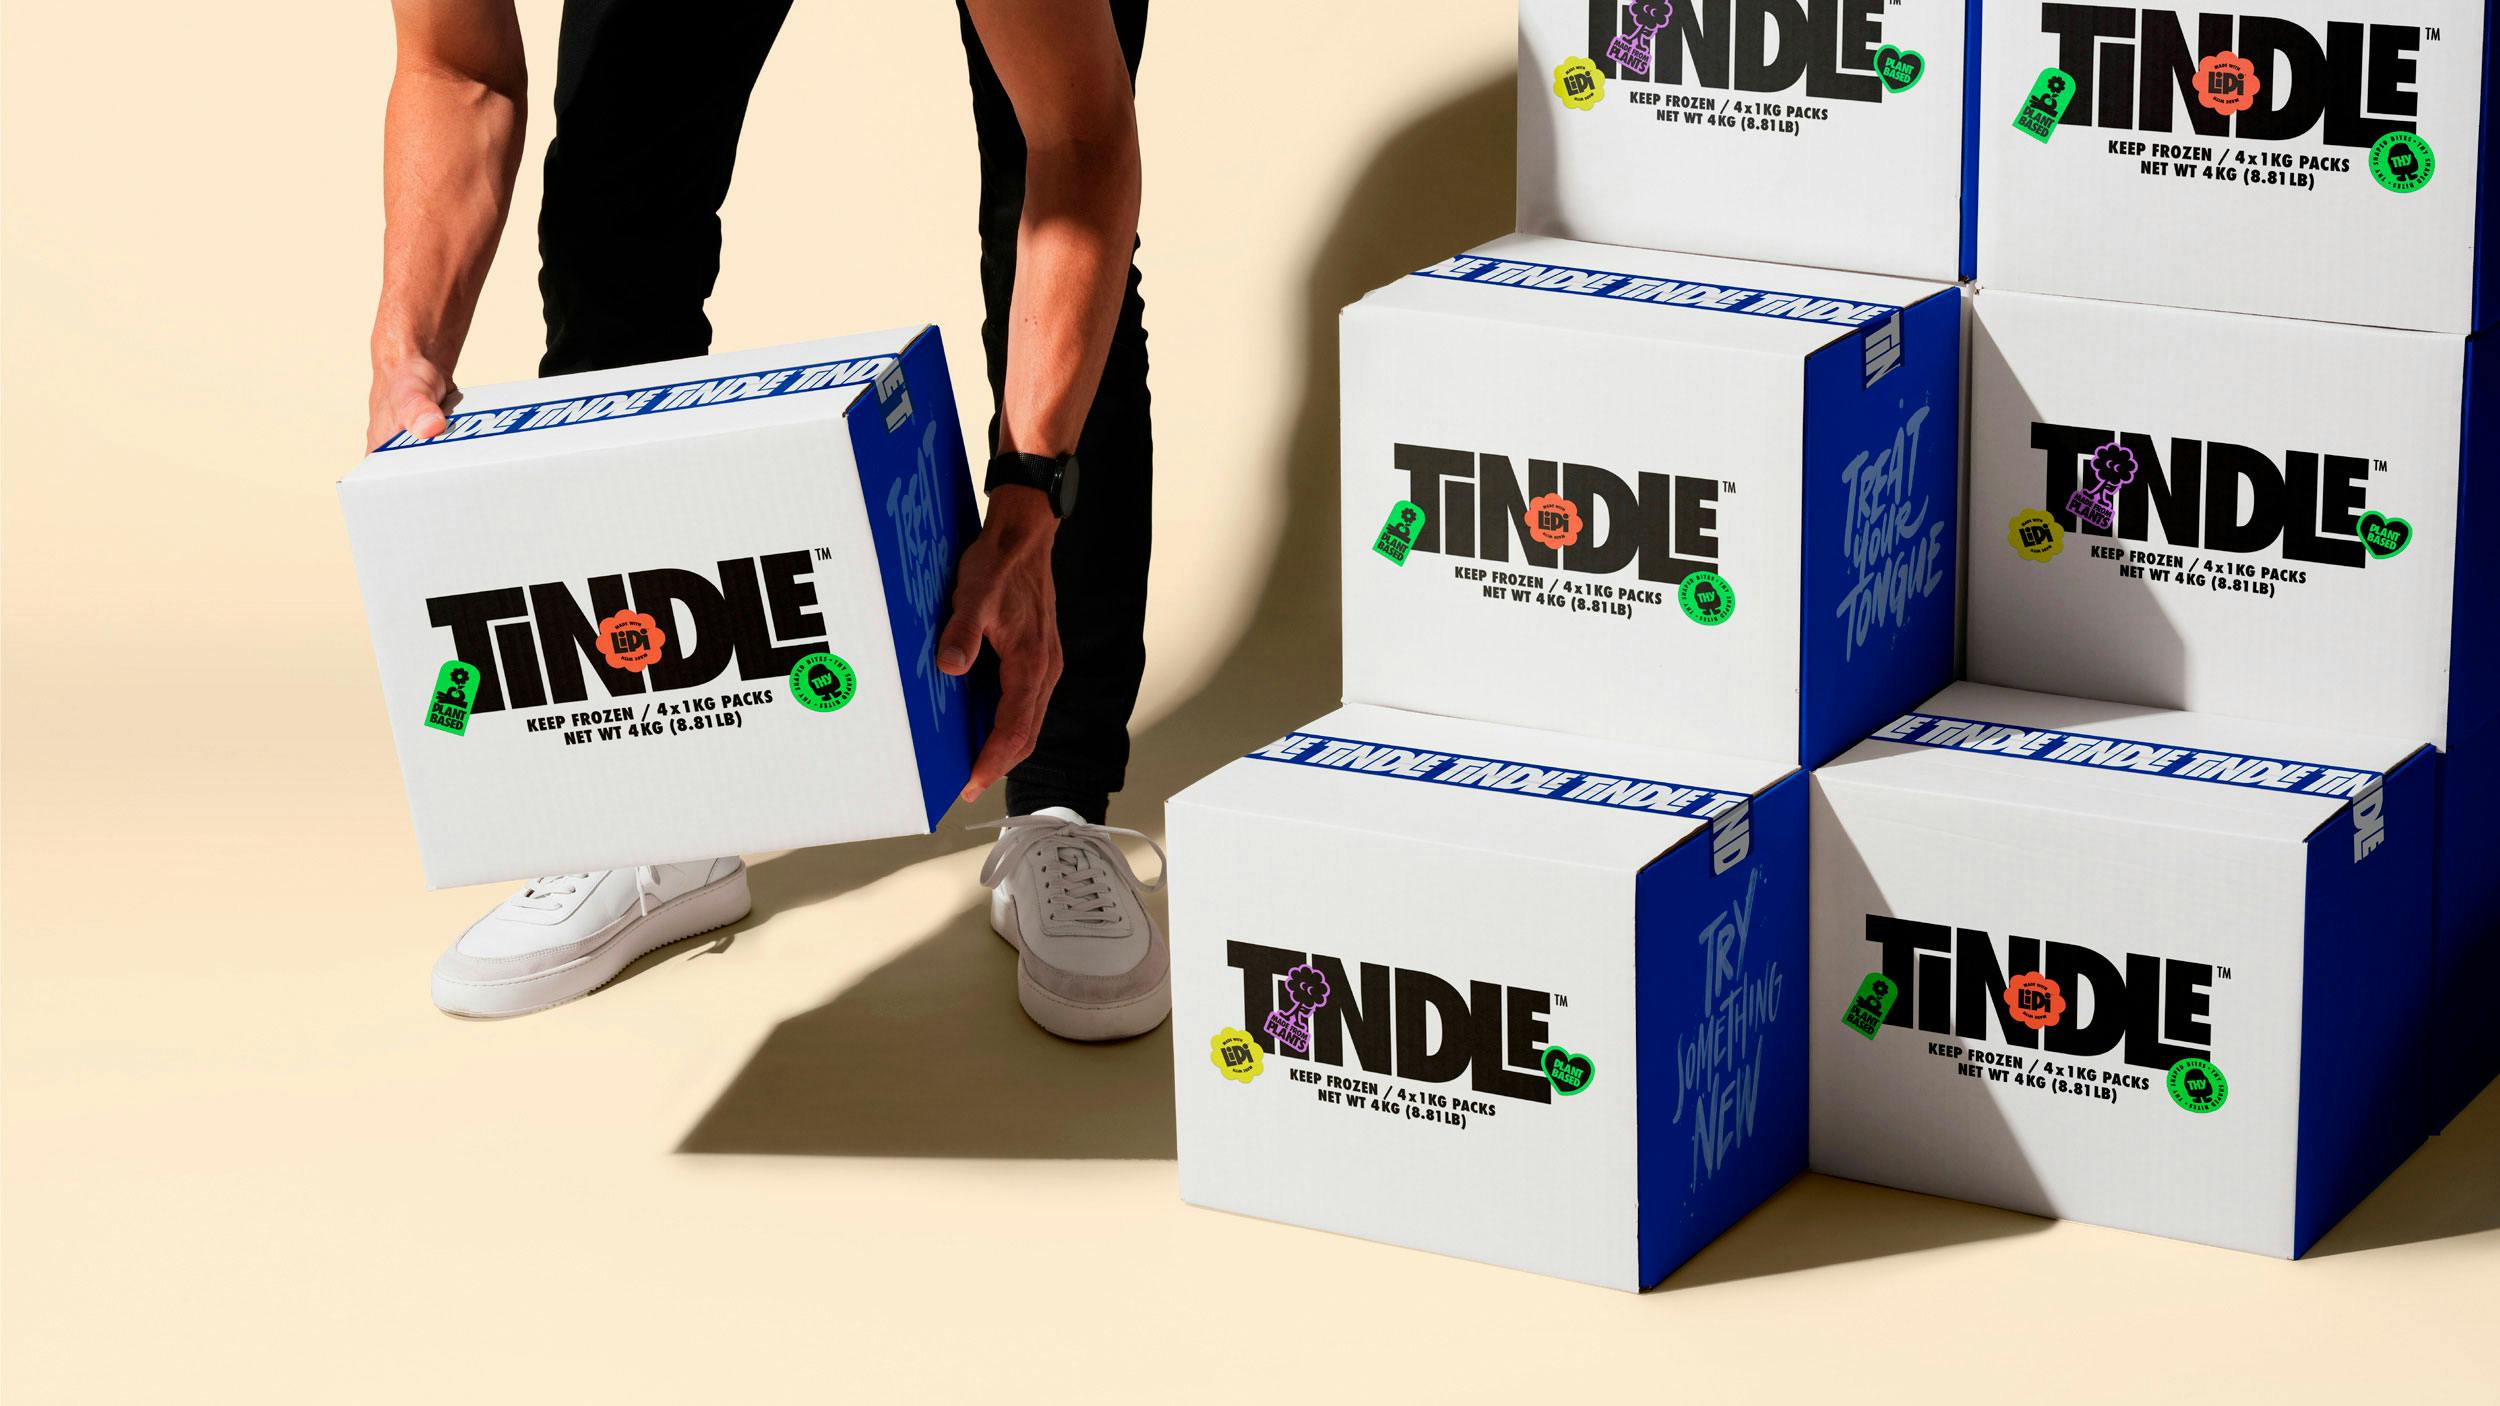 TiNDLE boxes